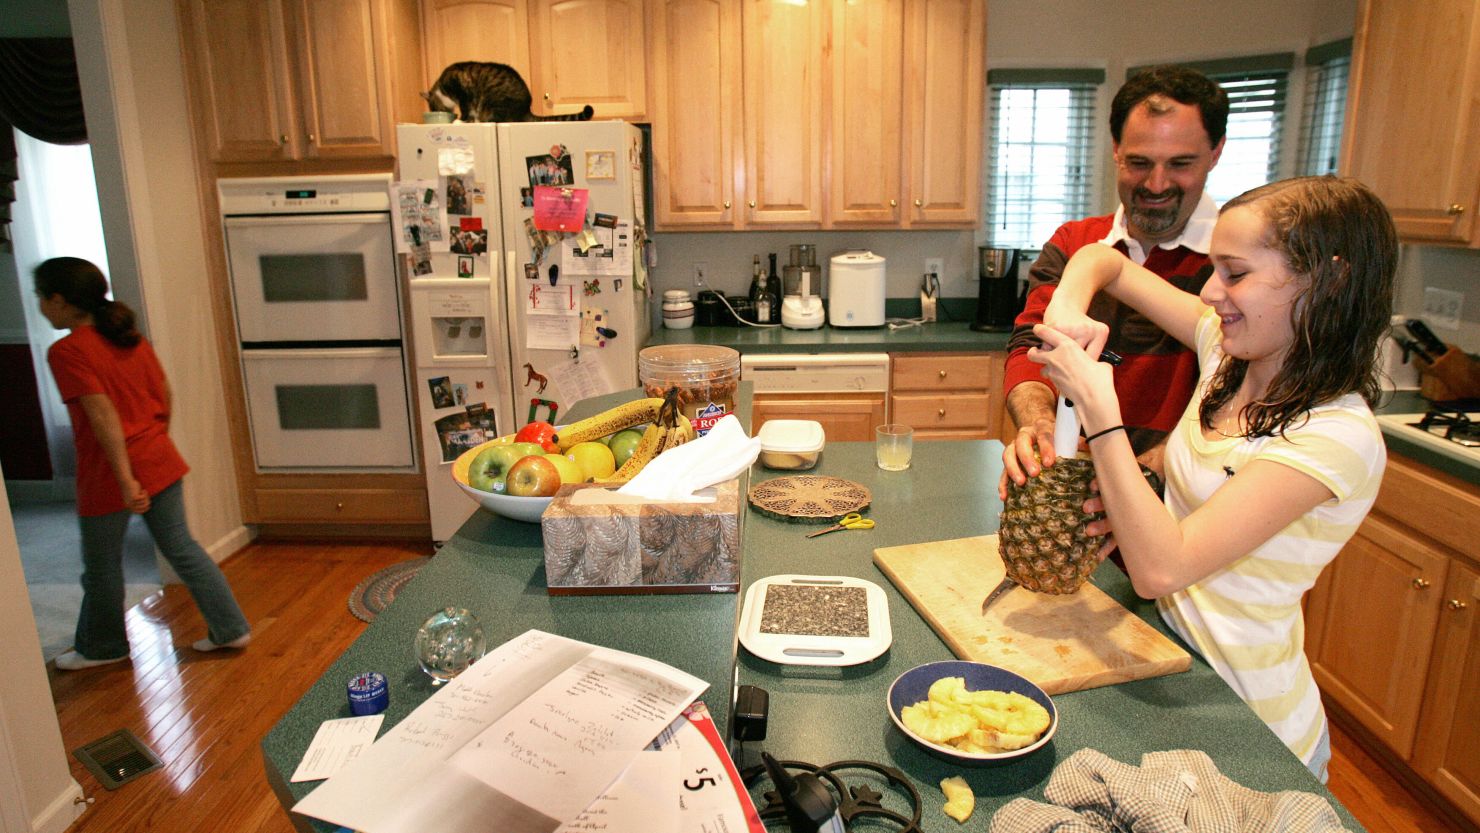 A stay-at-home dad helps his daughter. A  study finds that more mothers are the chief breadwinners in their families.

